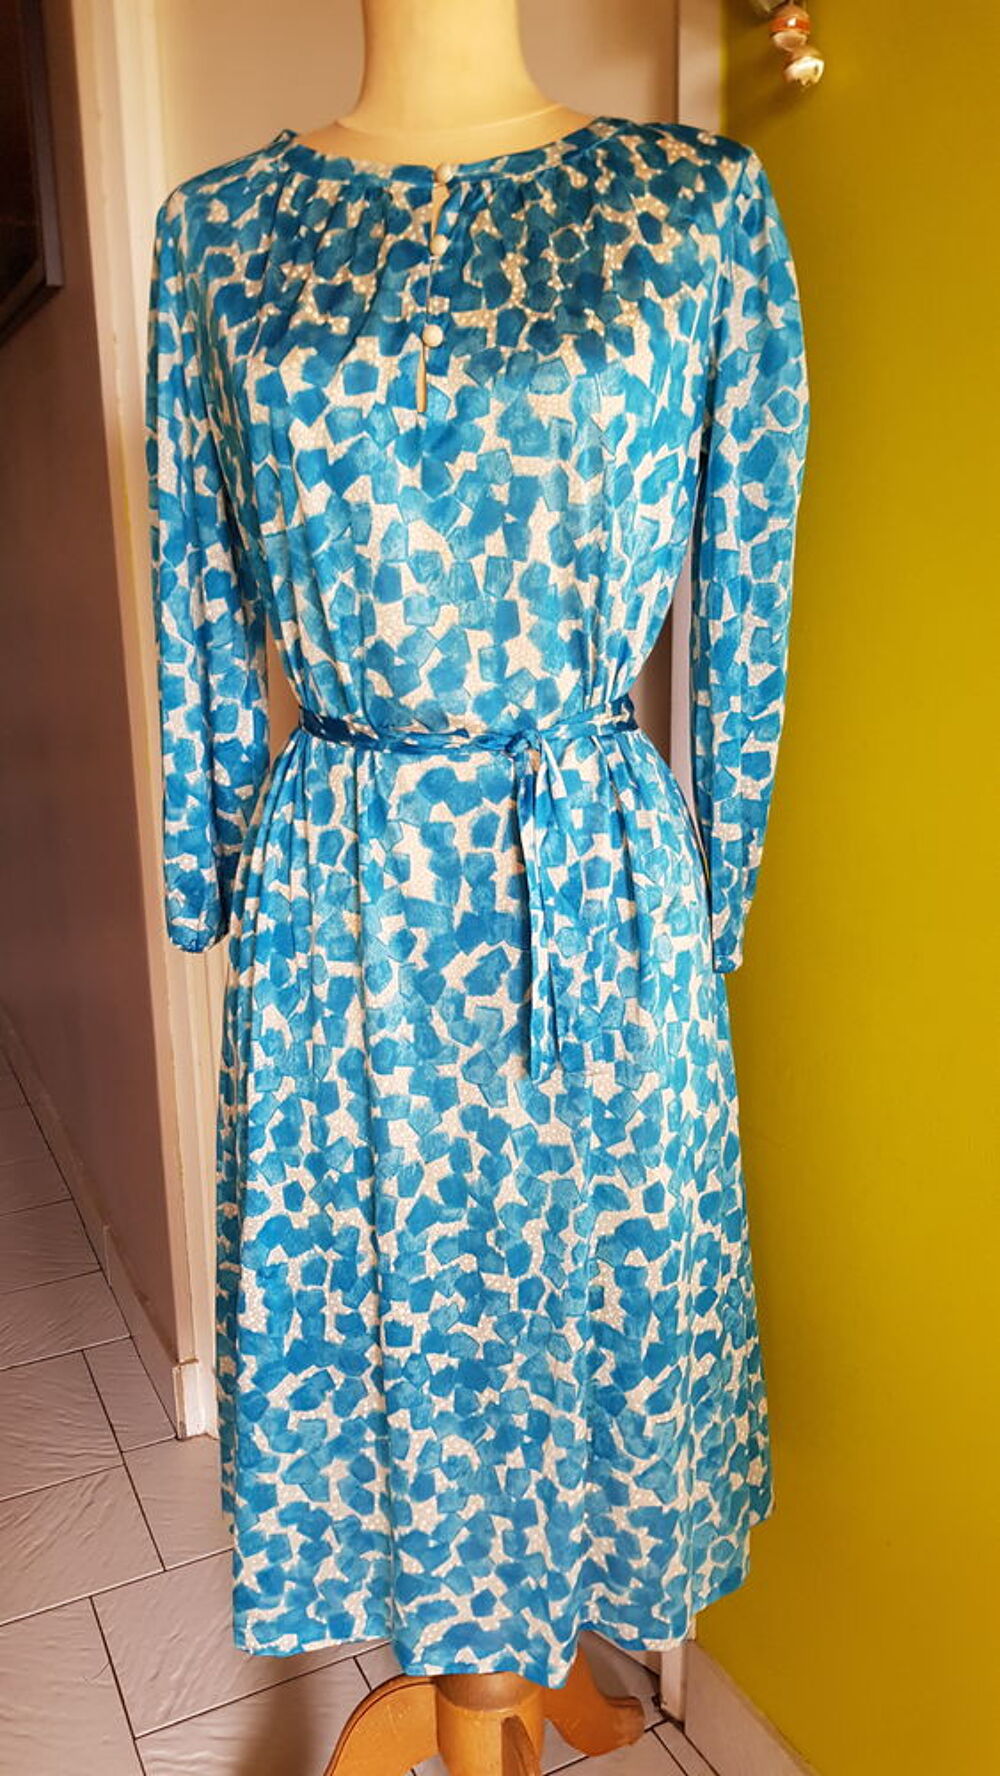 Robe manches longues taille 42
Vtements